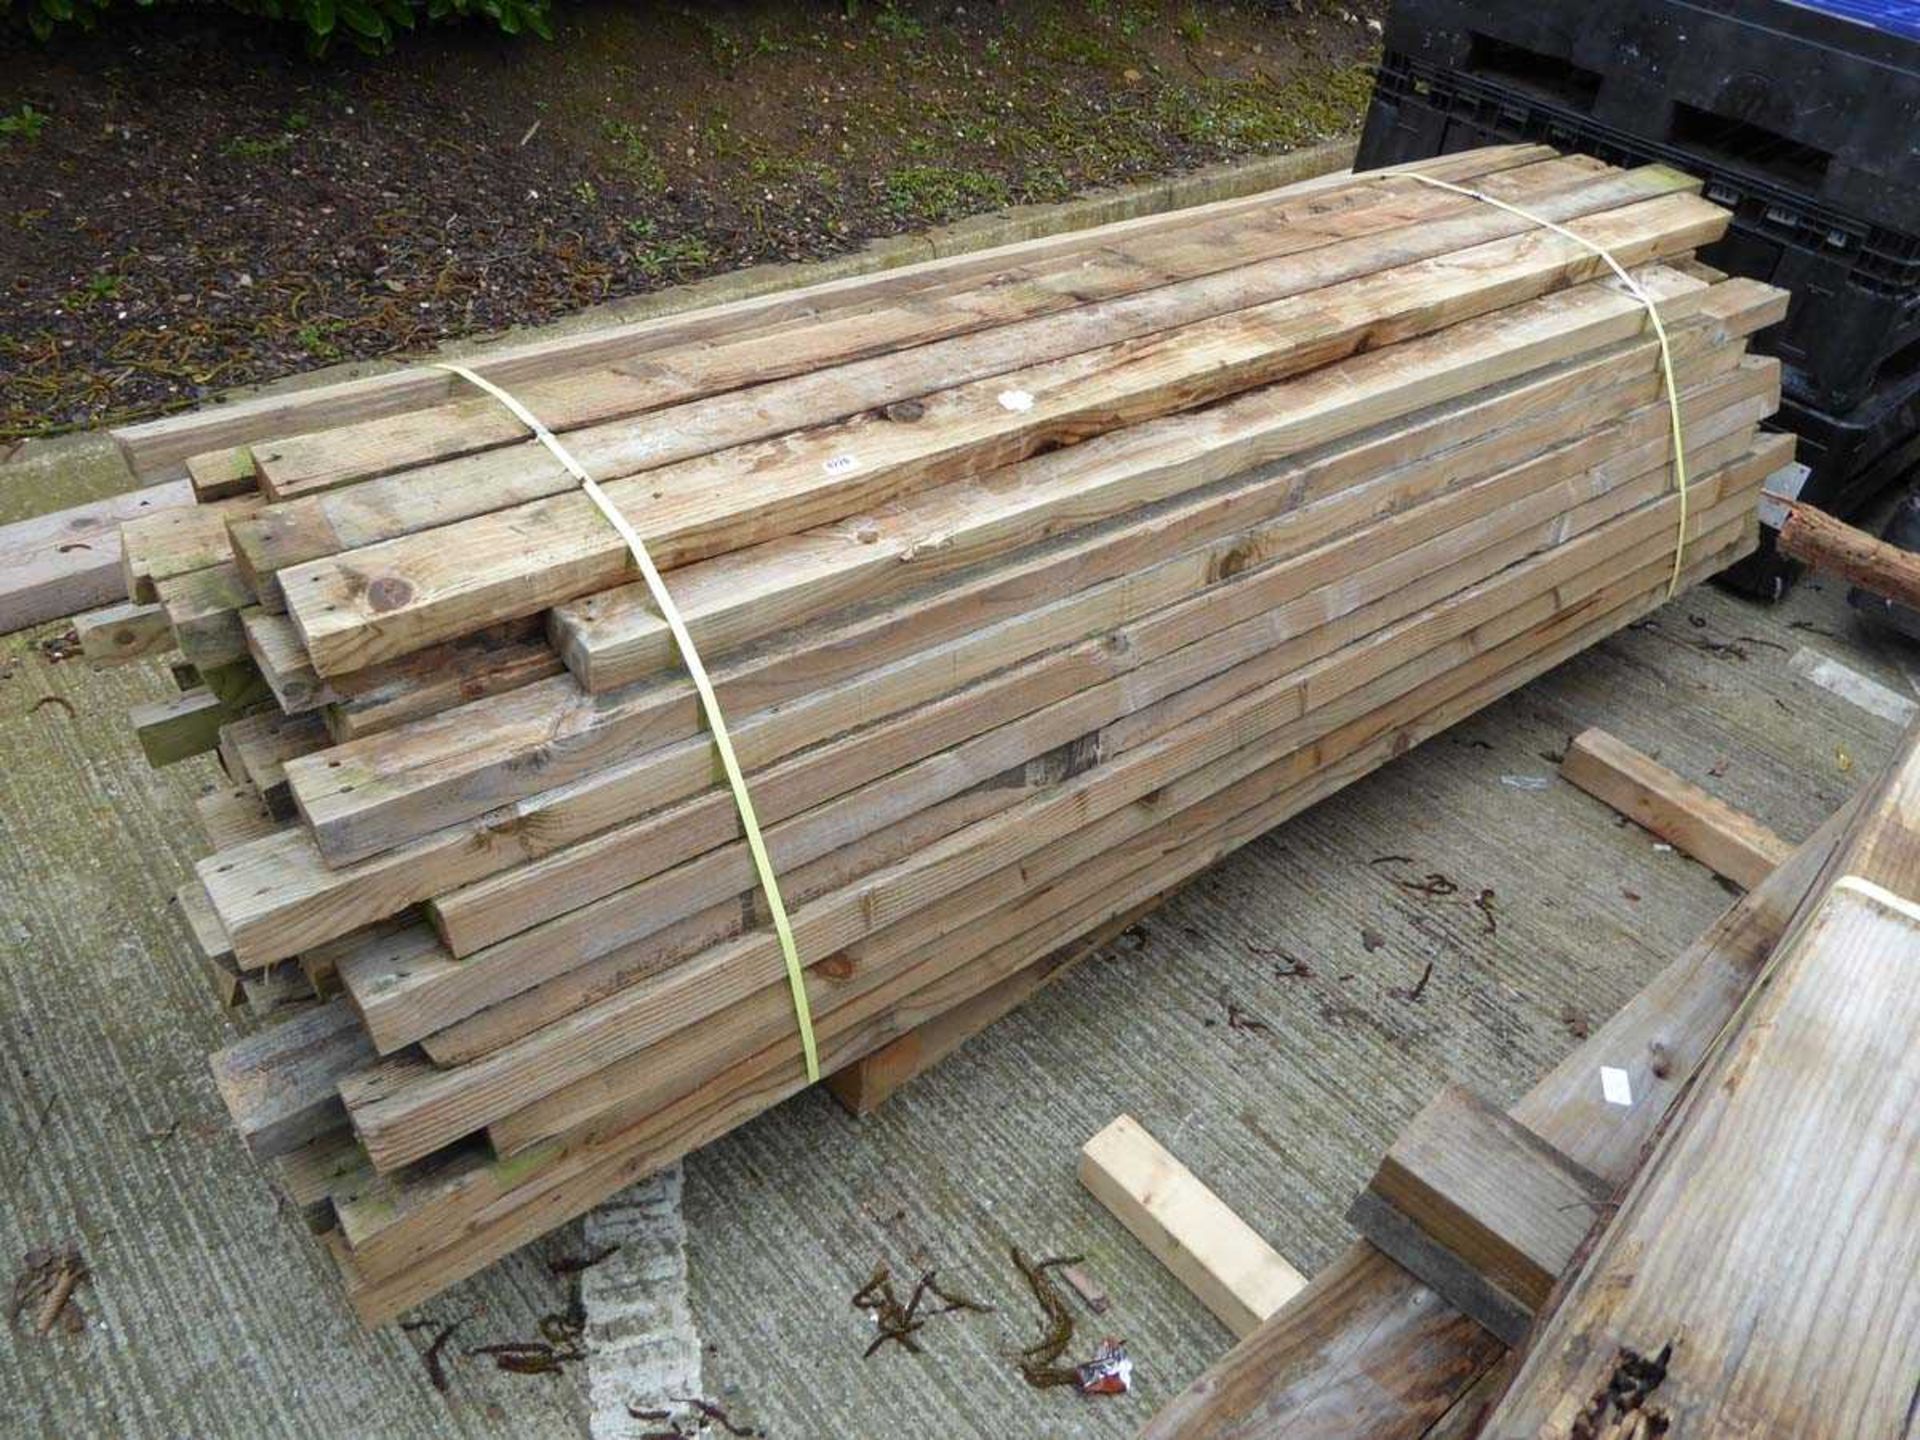 Large bundle of approx. 4x2" timber